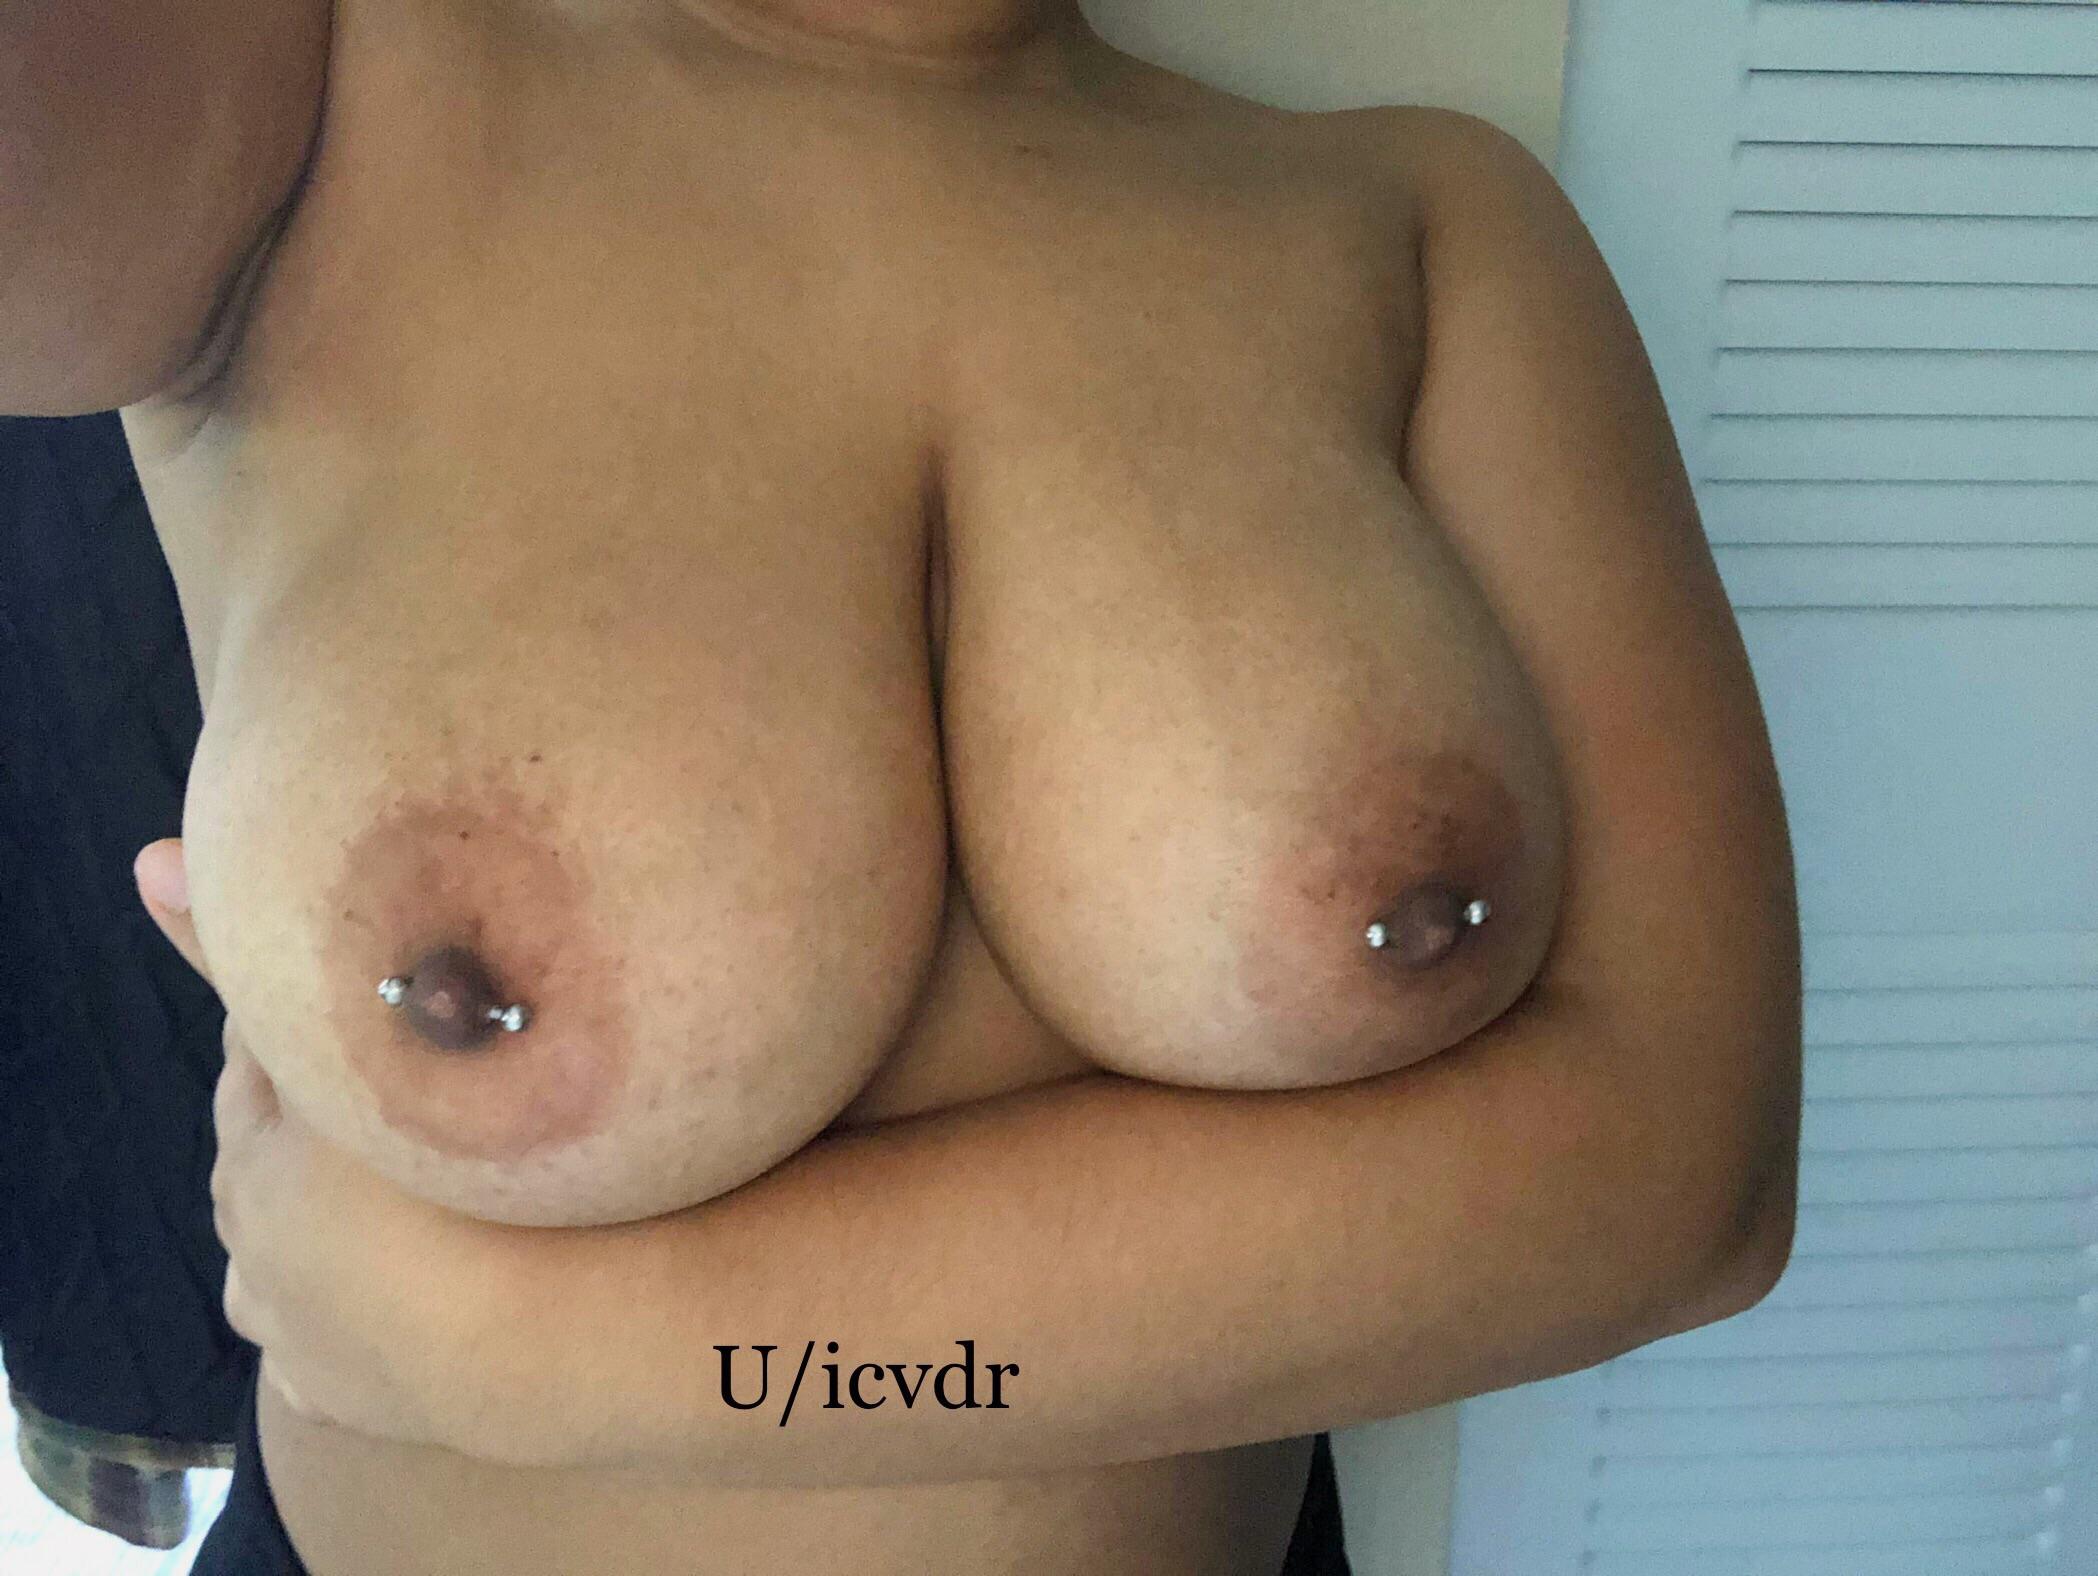 Would you fuck them